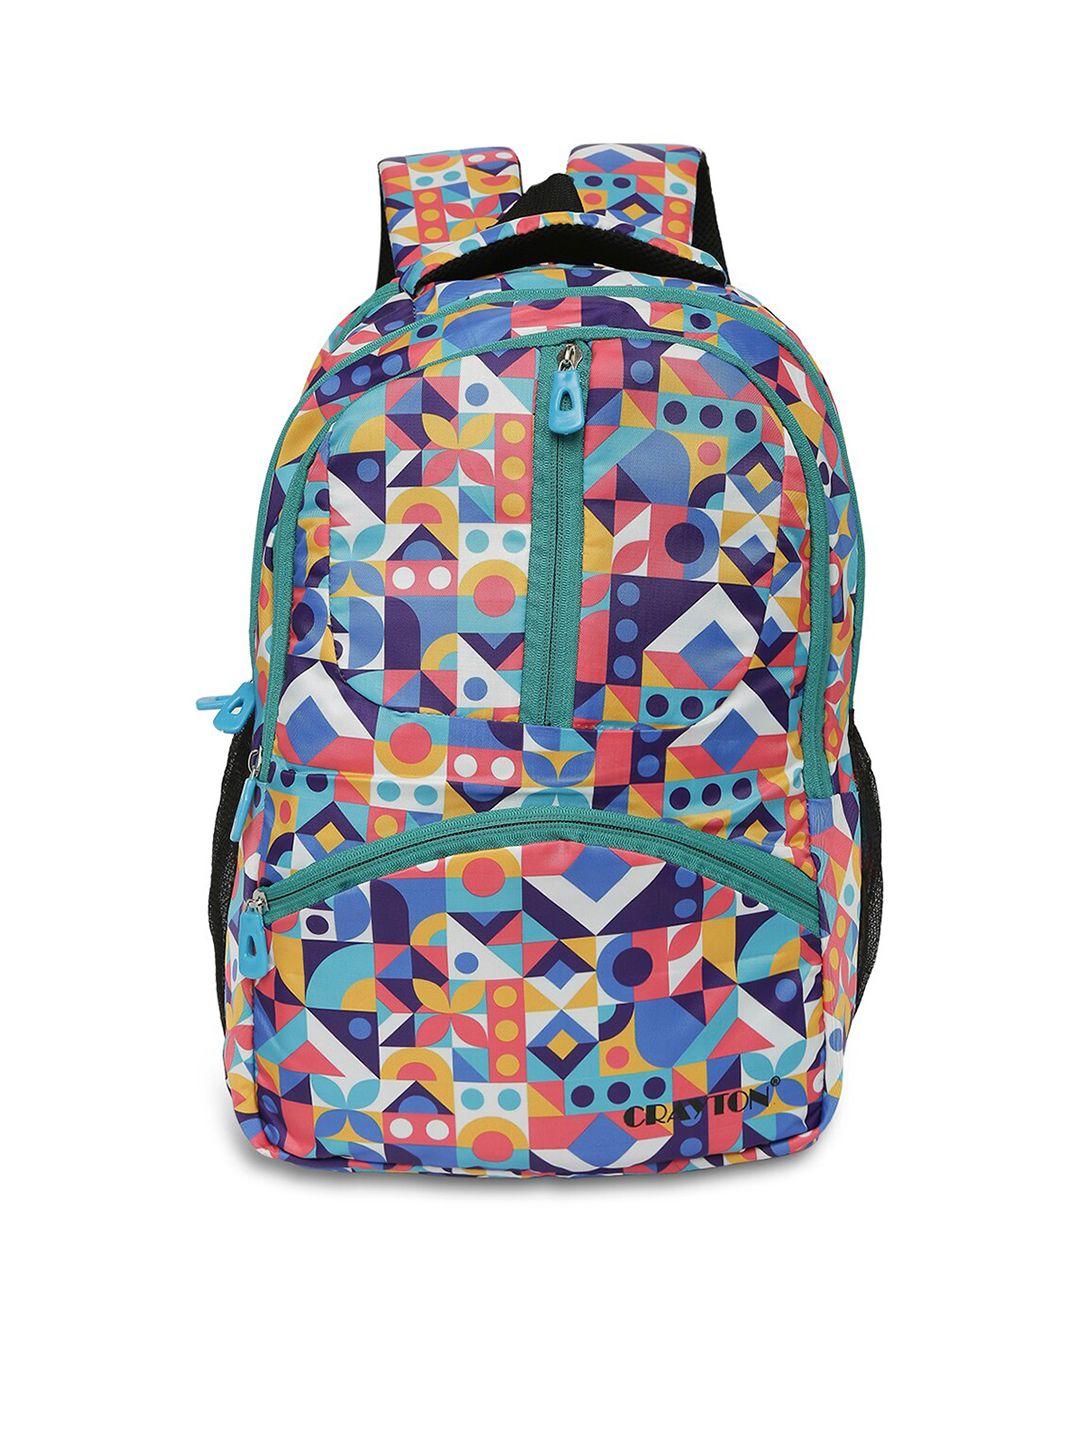 crayton printed 15 inch laptop backpack with compression straps